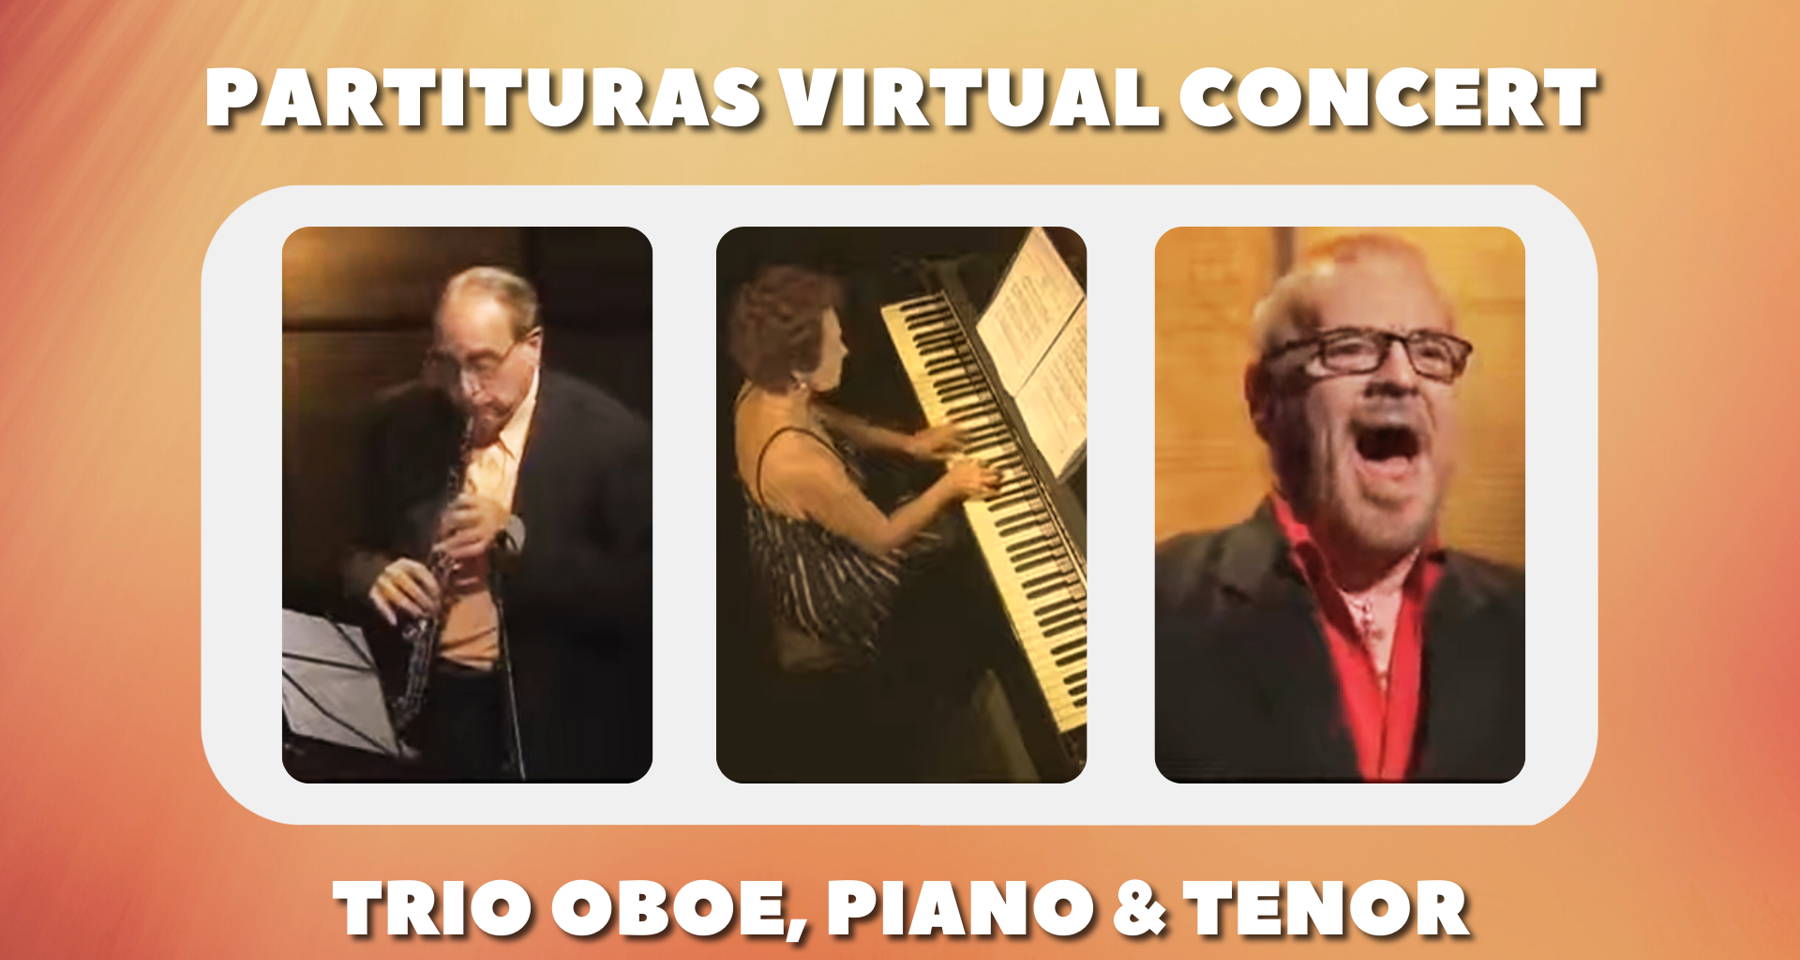 A virtual musical voyage featuring a tenor, oboist and pianist